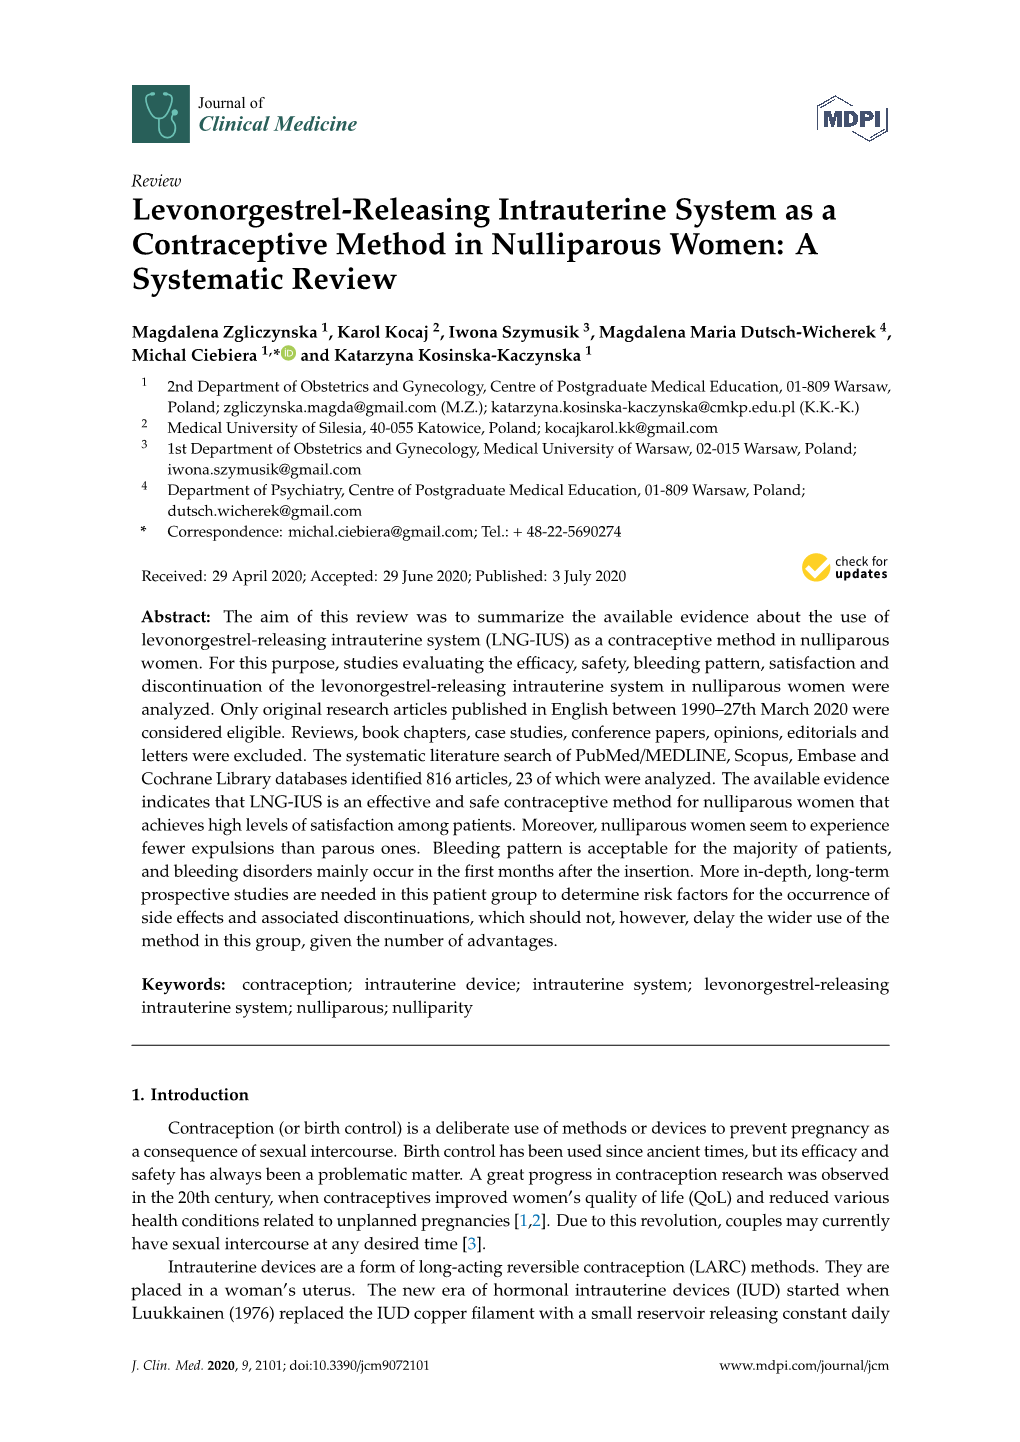 Levonorgestrel-Releasing Intrauterine System As a Contraceptive Method in Nulliparous Women: a Systematic Review